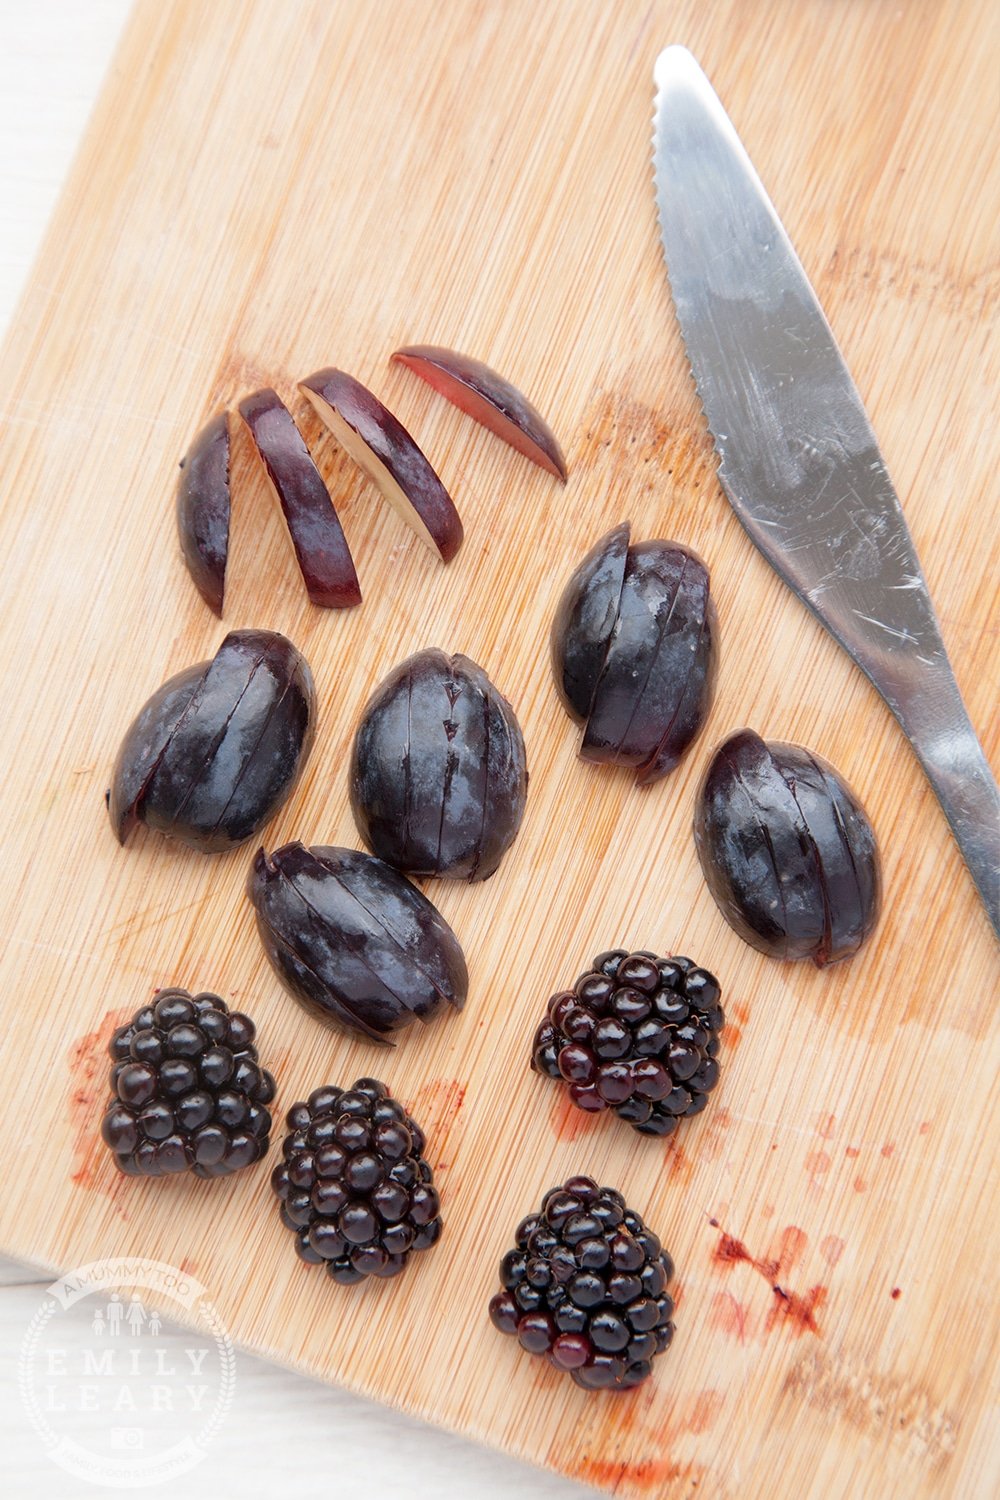 Sliced grapes and blackberries on a wooden board.